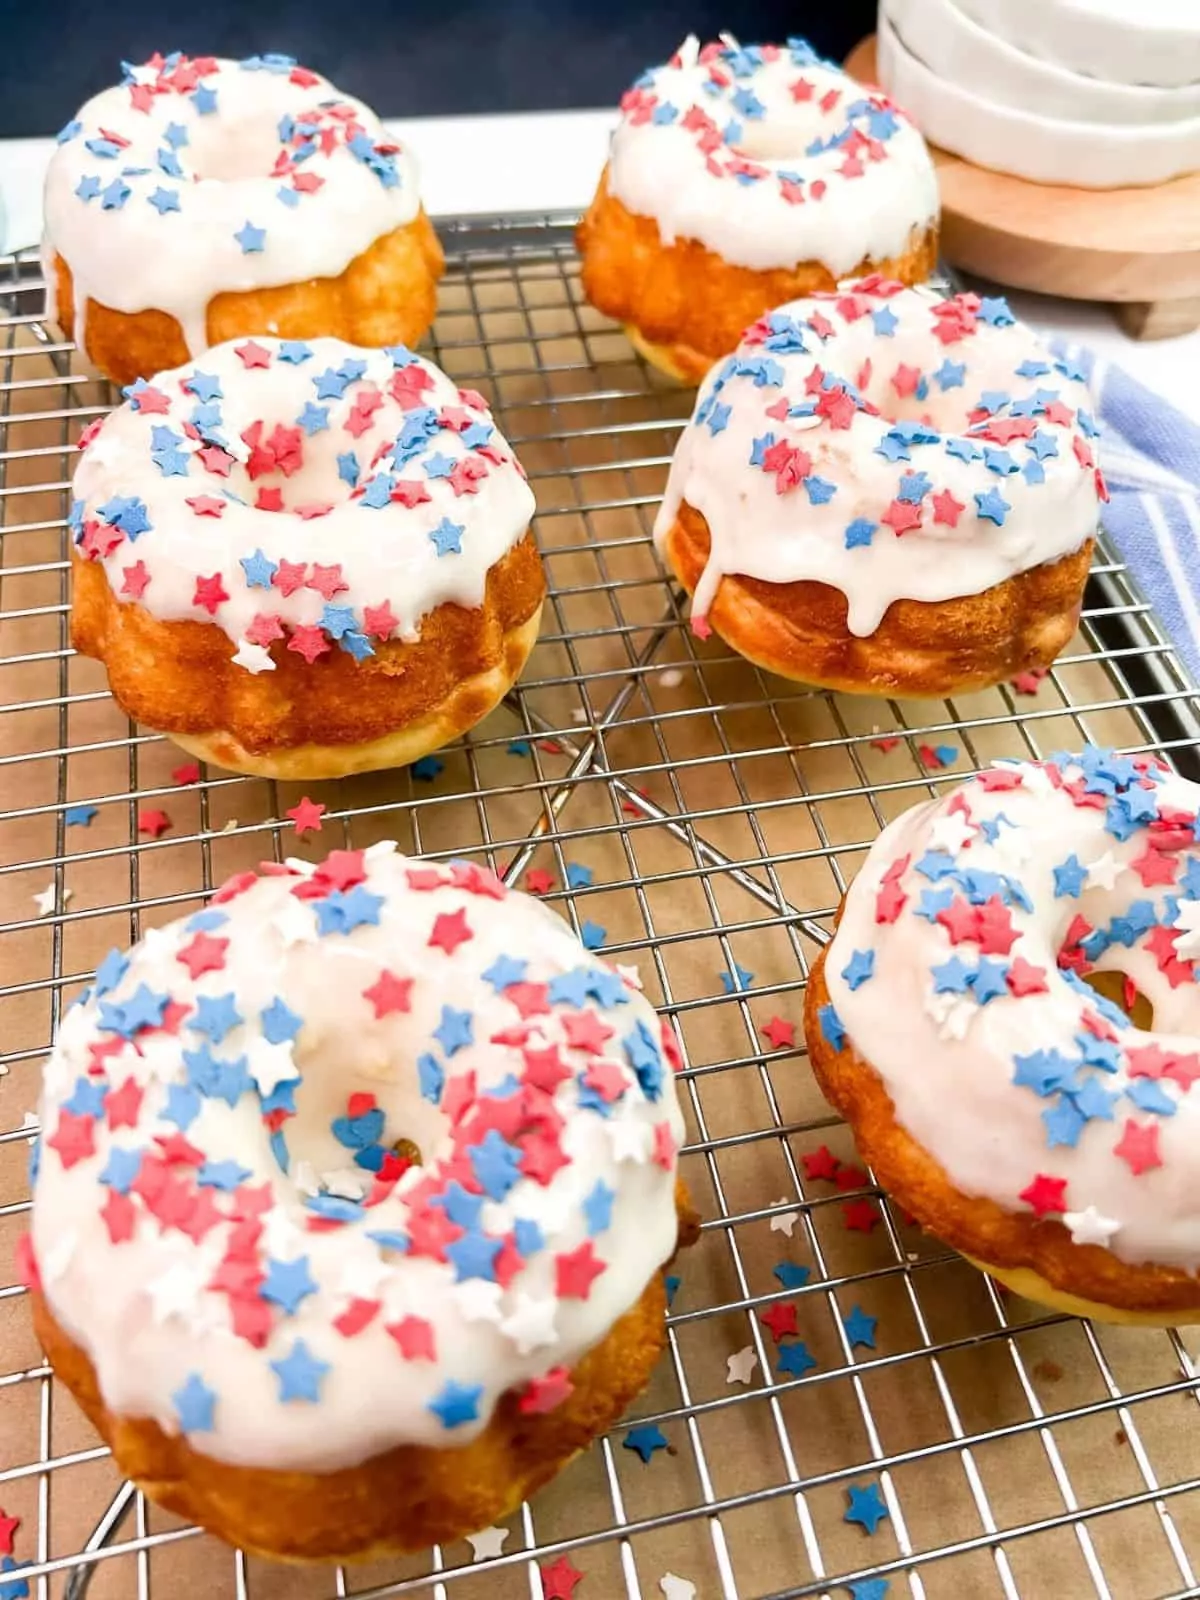 decorated patriotic bundt cake with frosting and star shaped sprinkles.